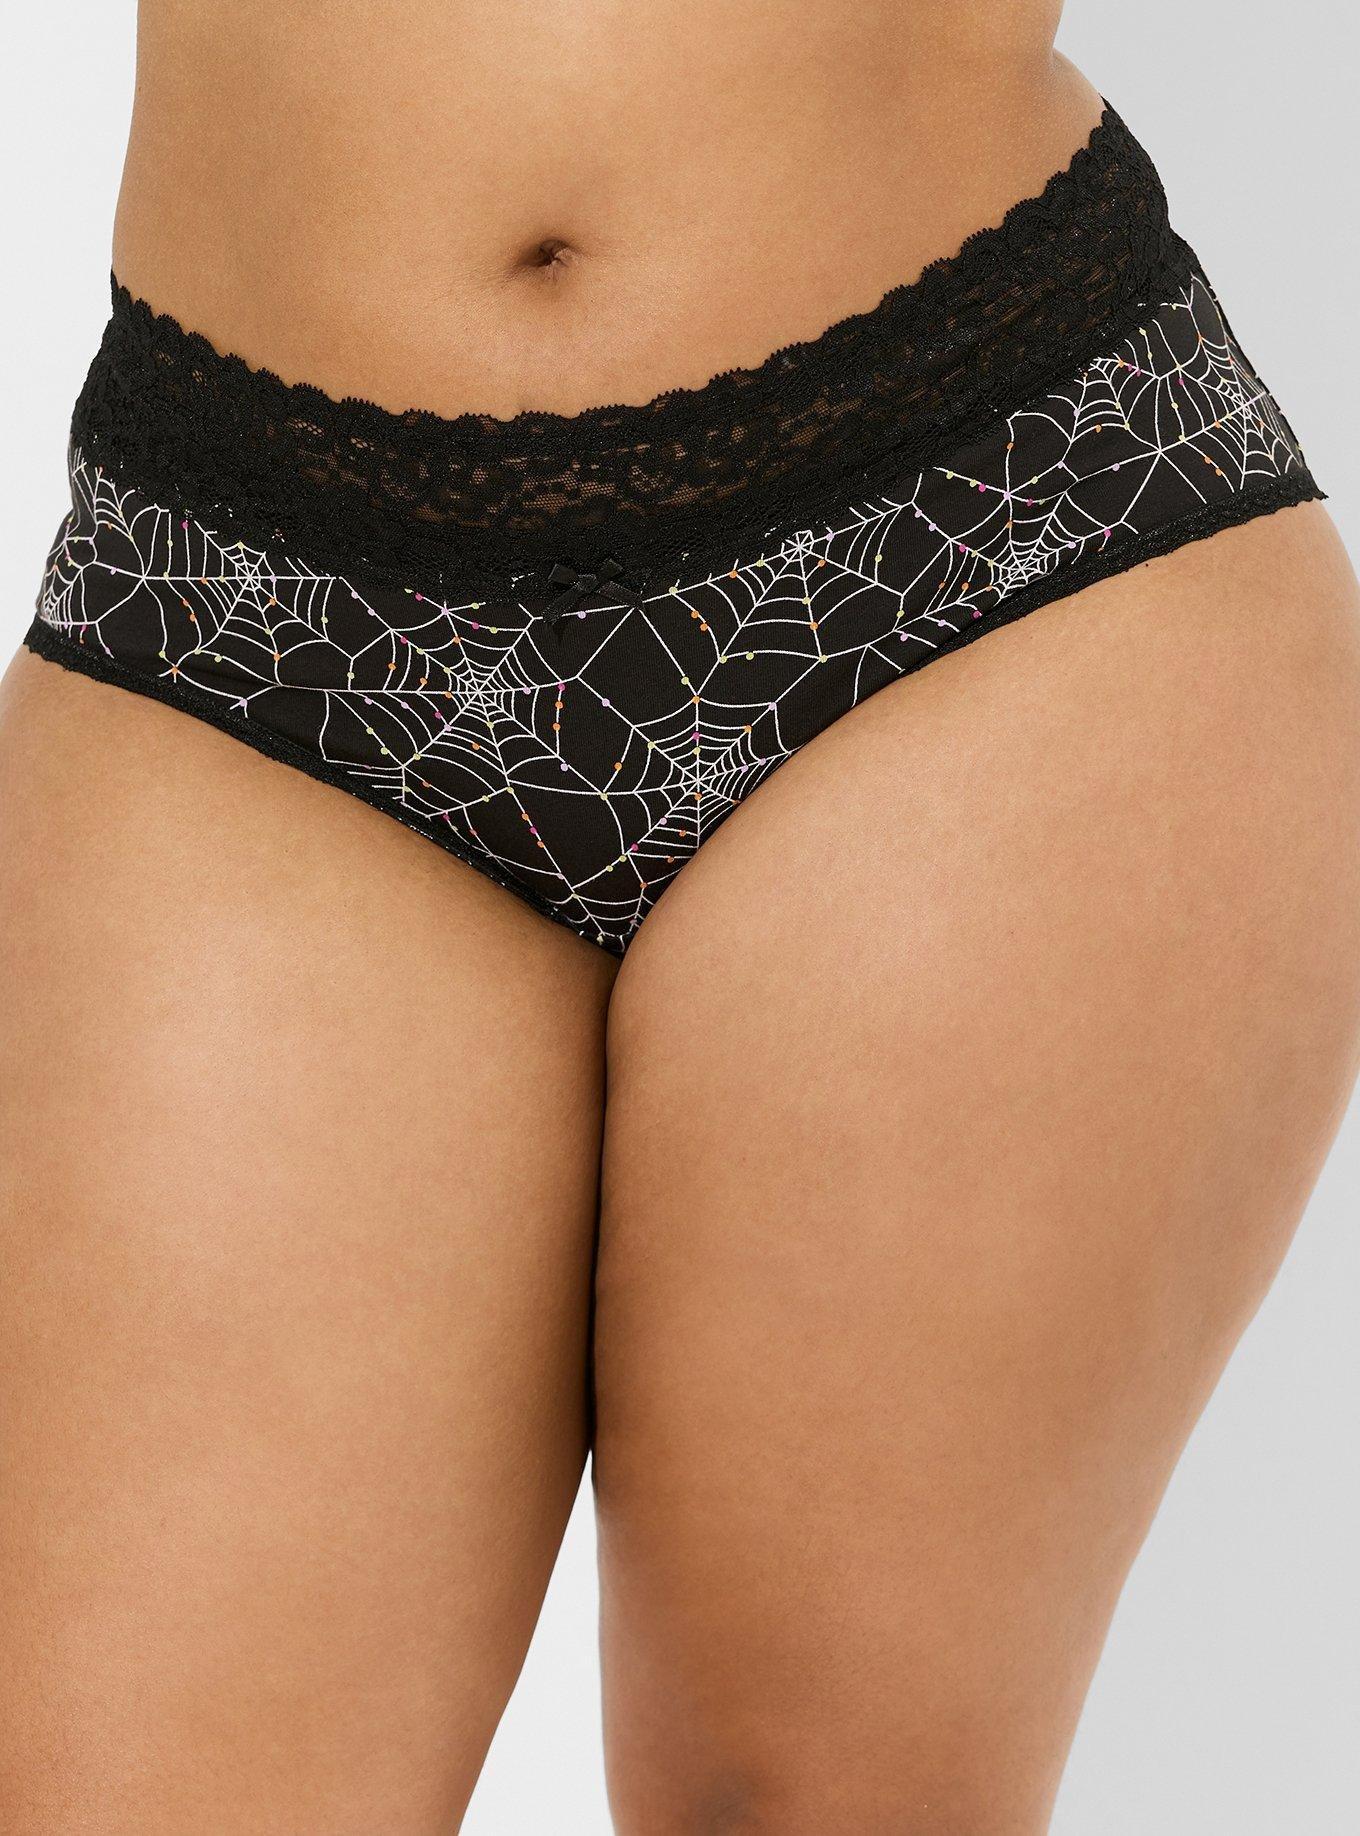 Smart & Sexy Women's Signature Lace Cheeky Panty 2 Pack, Black Hue